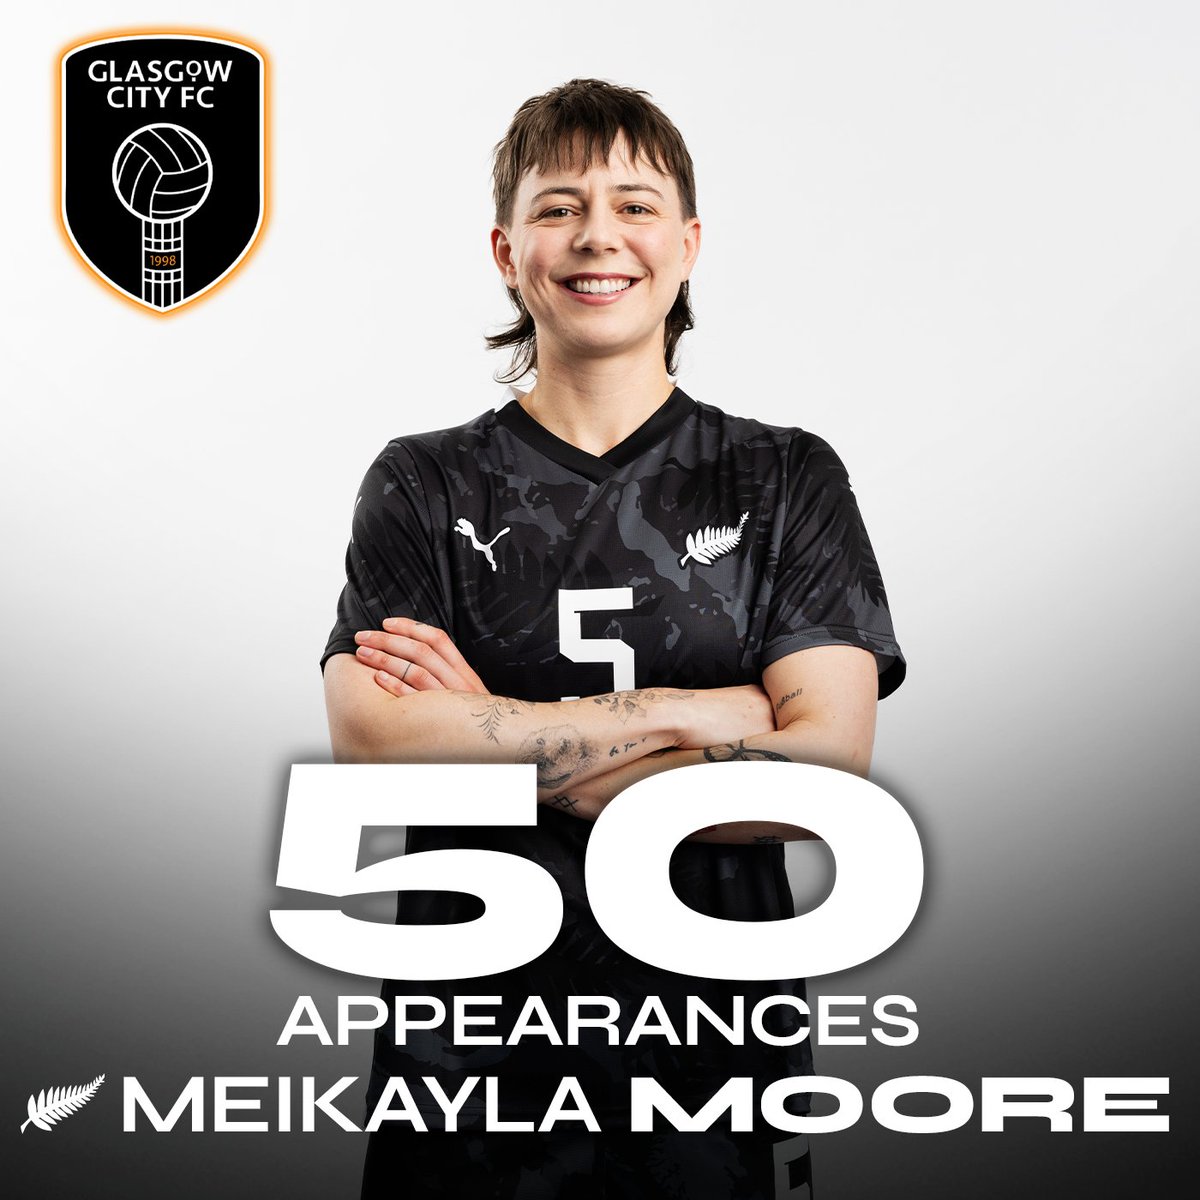 Congratulations to Meikayla Moore who made her 50th appearance for @GlasgowCityFC in a 2-0 win against Patrick Thistle 🏴󠁧󠁢󠁳󠁣󠁴󠁿👏